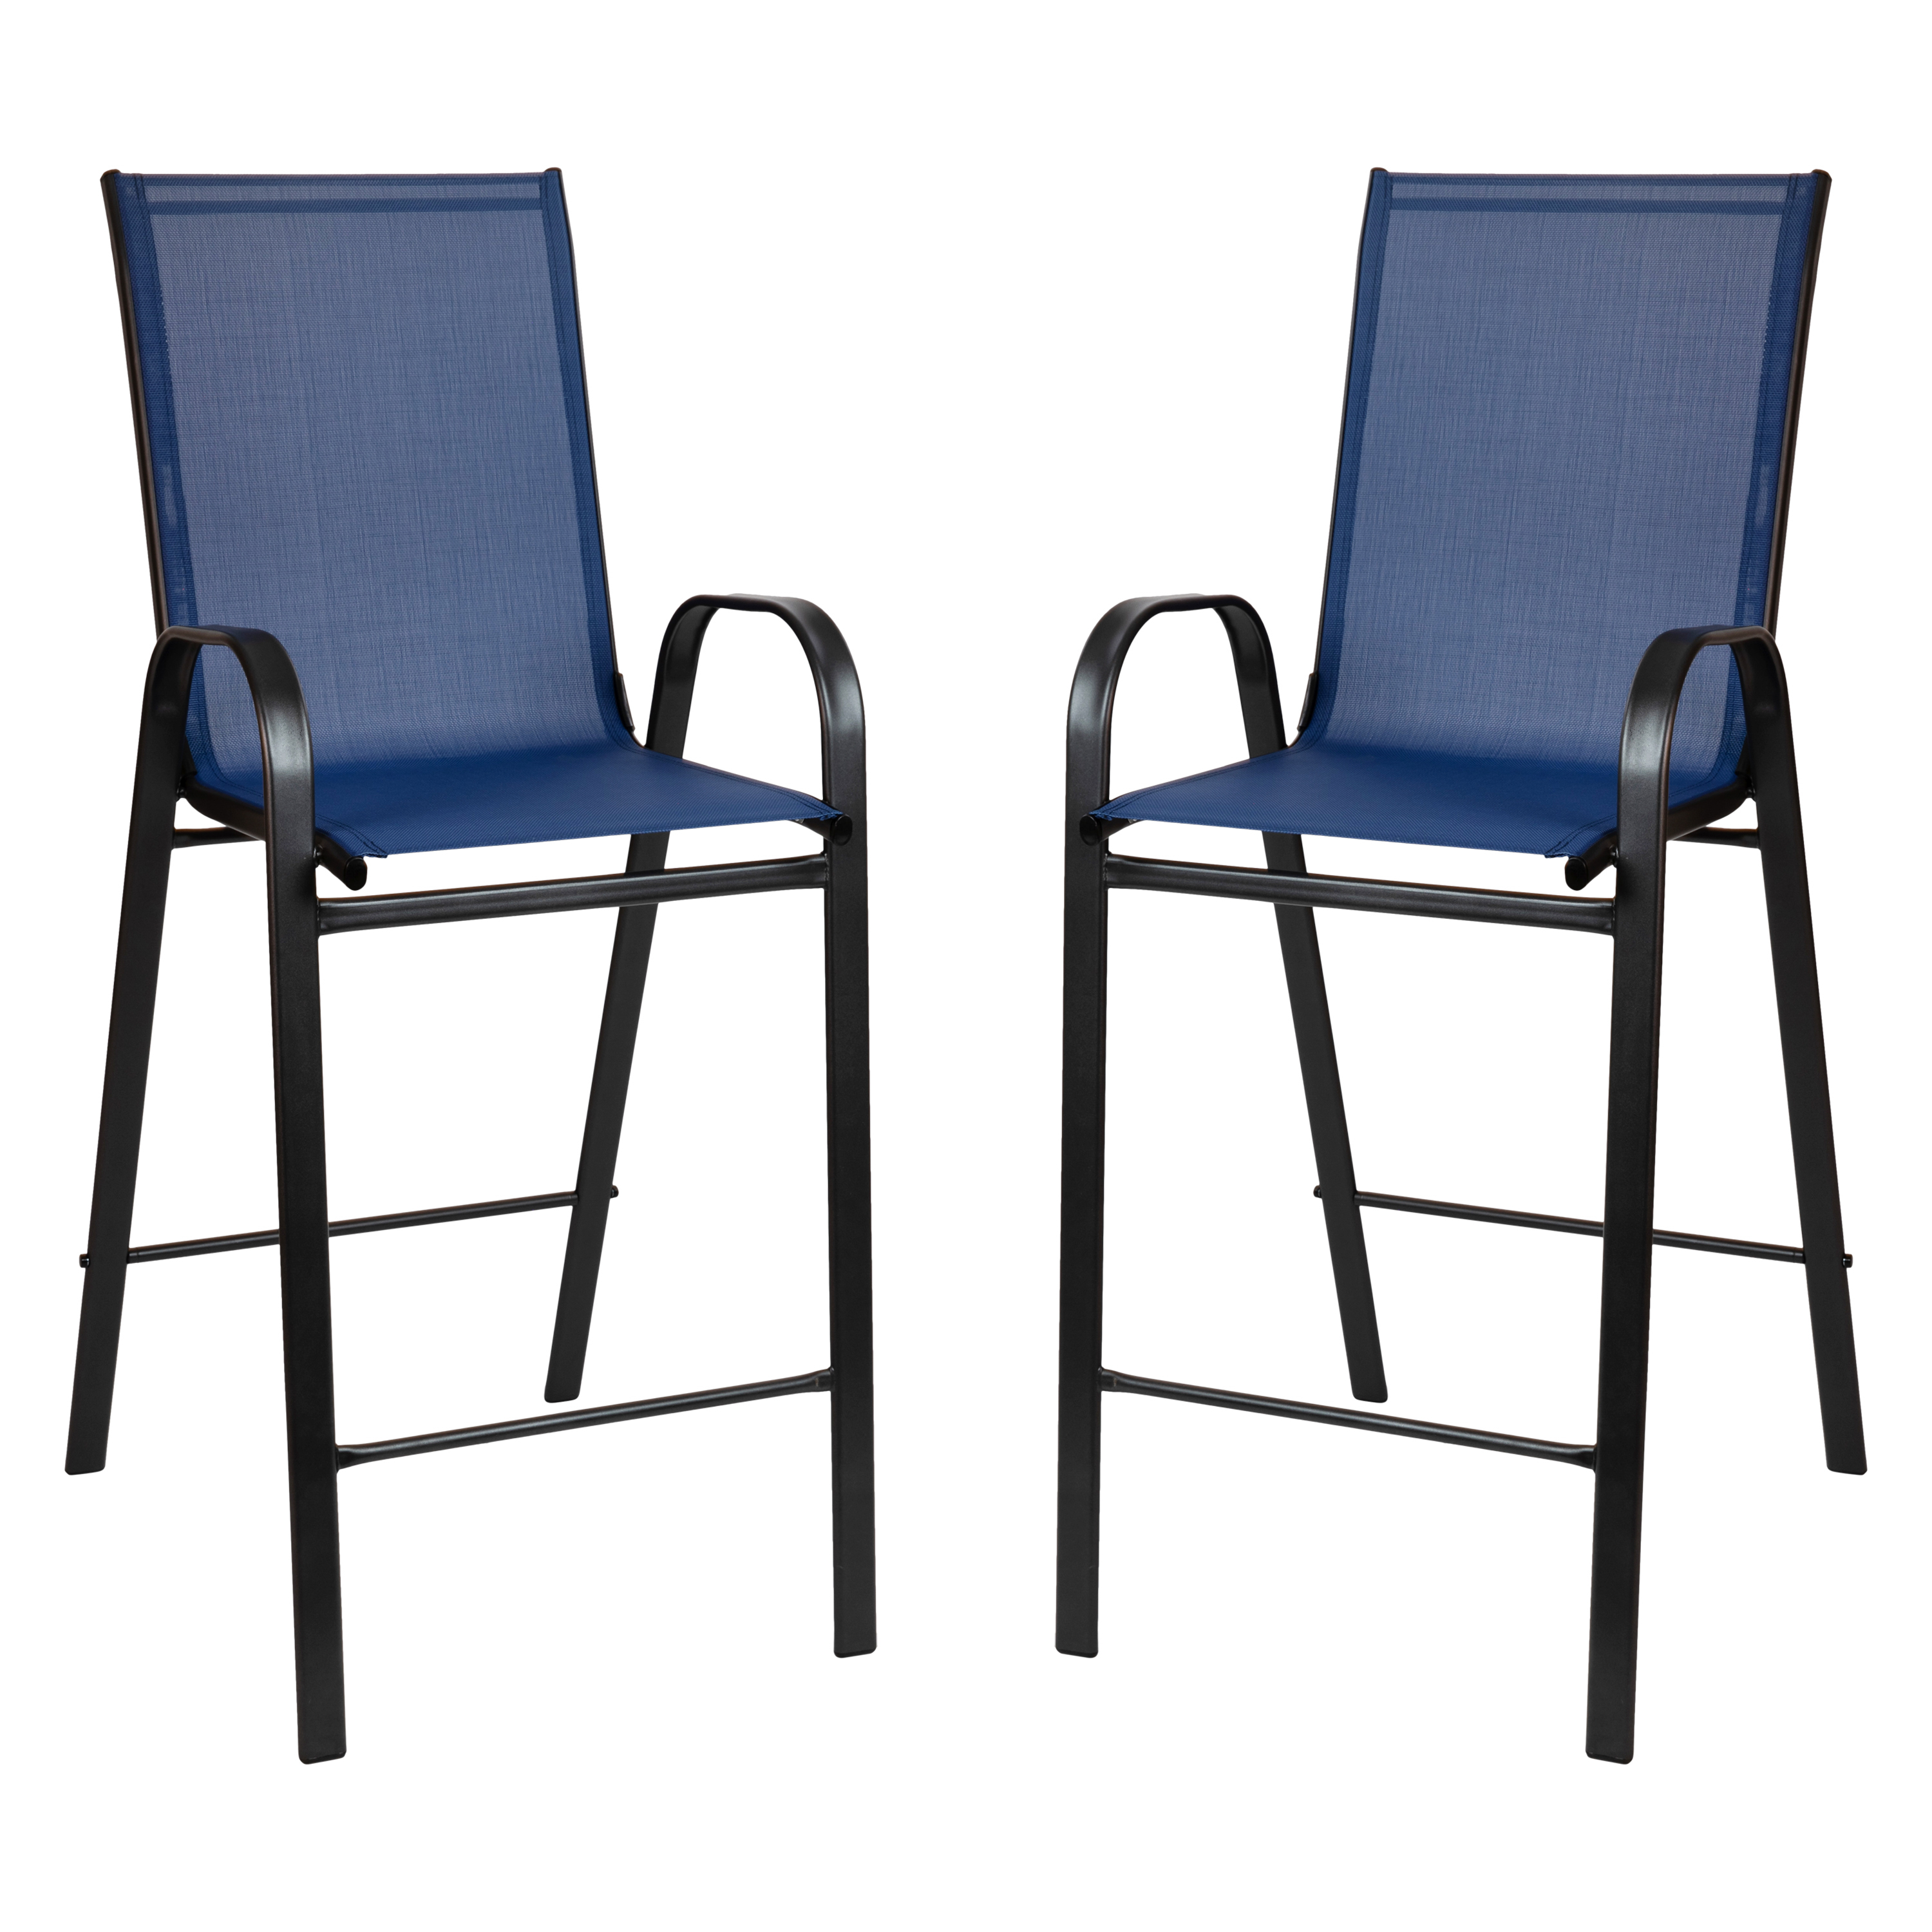 Flash Furniture 2-JJ-092H-NV-GG Series Navy Outdoor Bar Stool with Flex Comfort Material and Metal Frame, 2 Pack